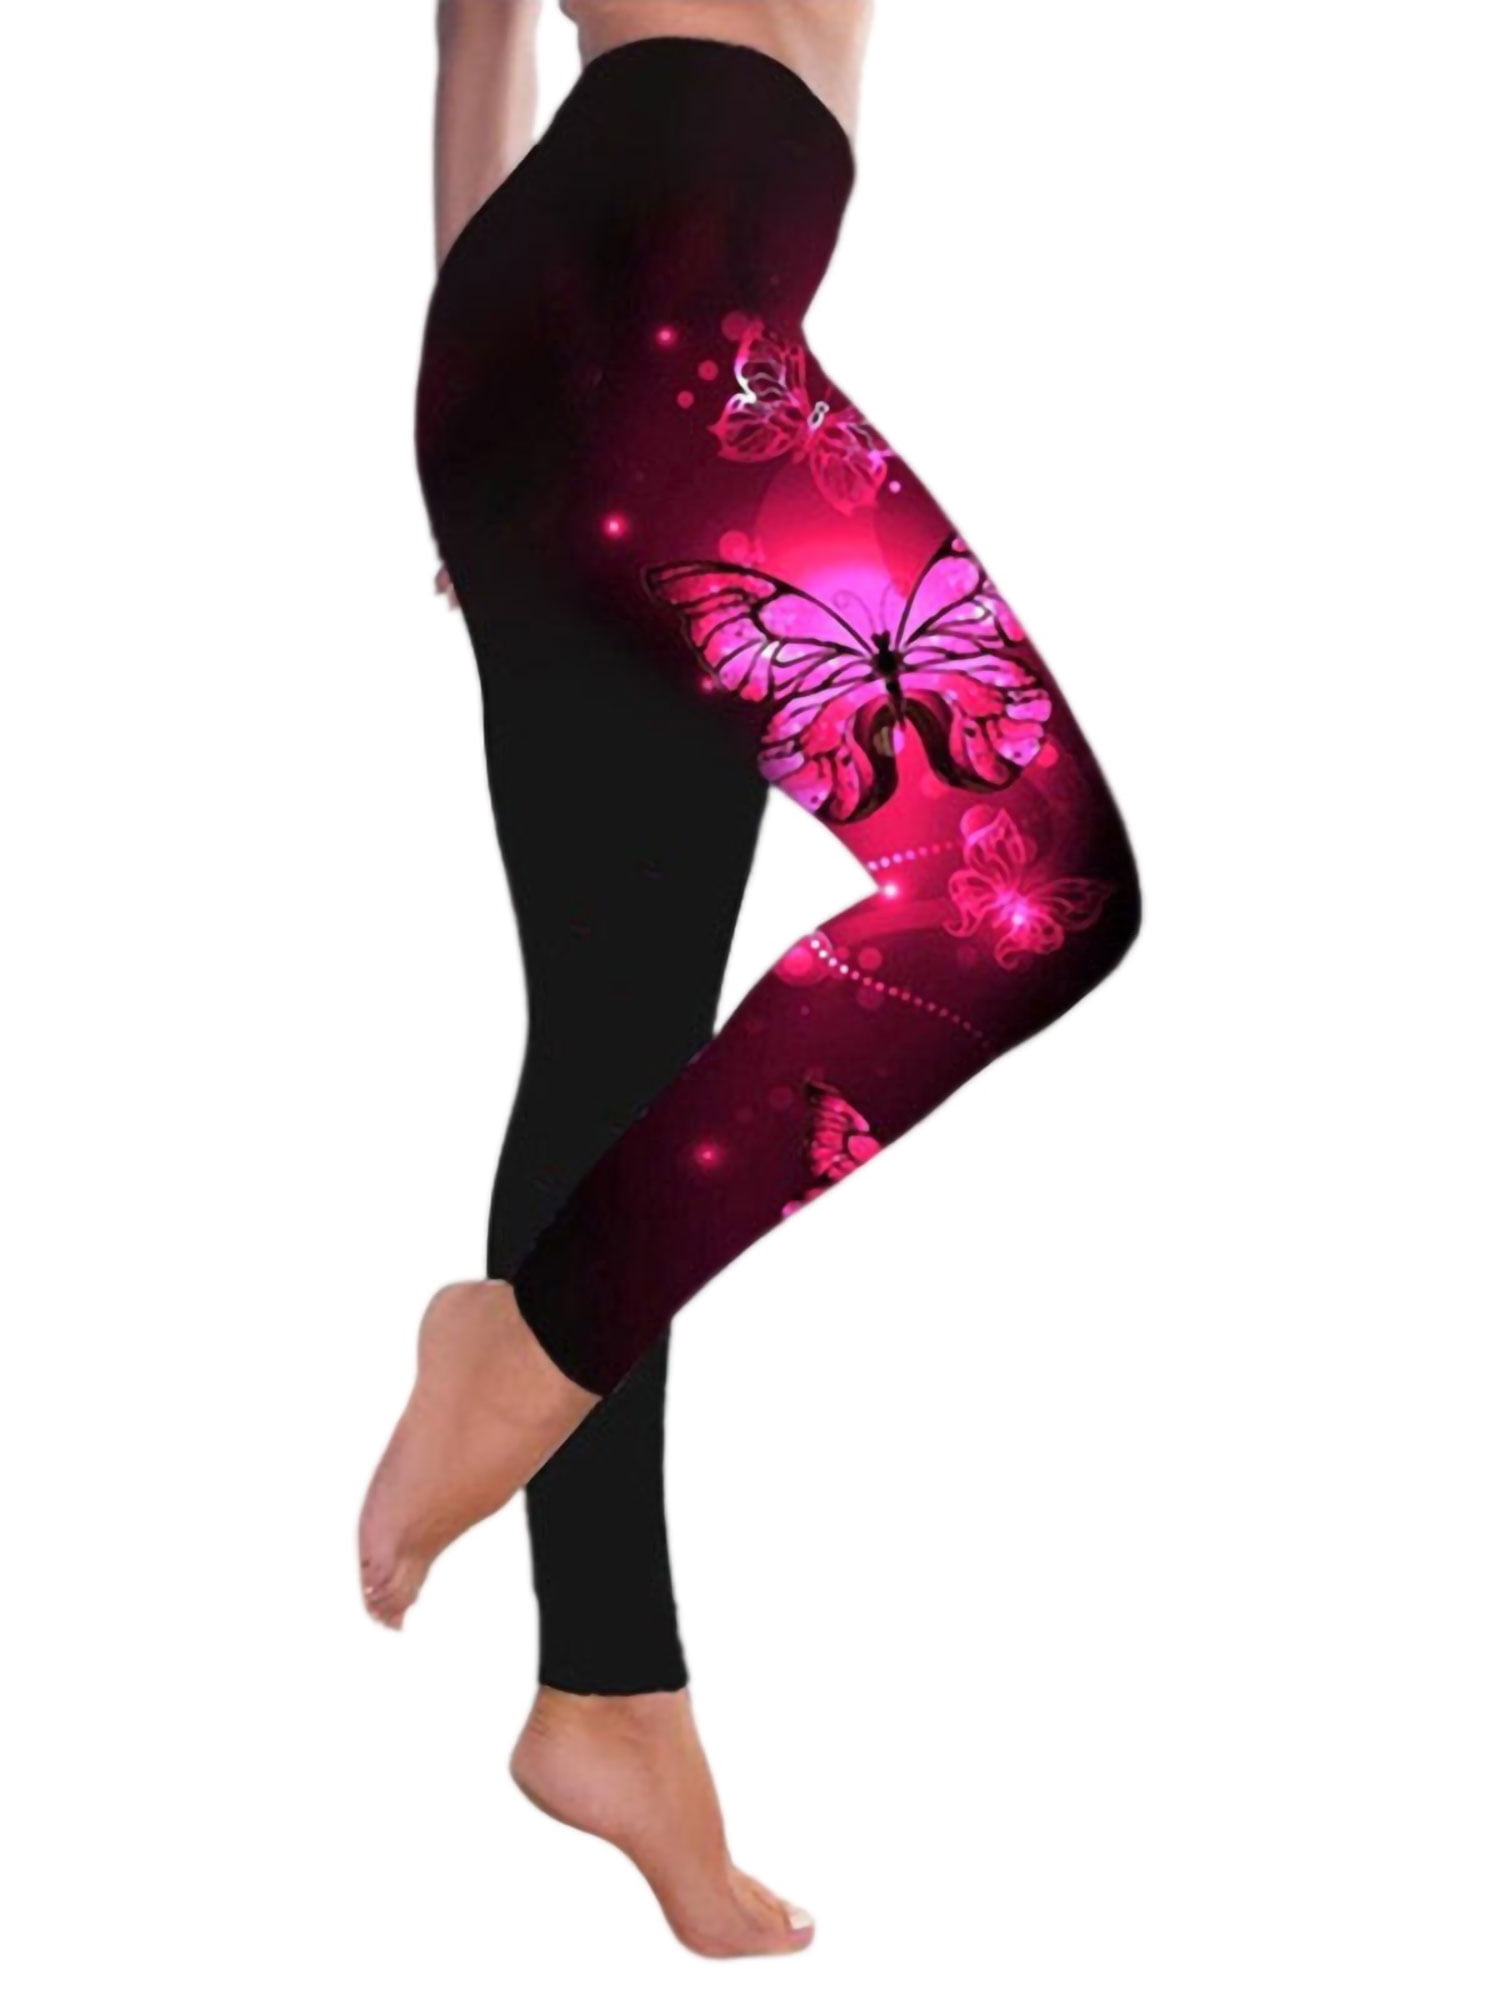 FLYILY Women Yoga Pants with Pockets High Waist Tummy Control Workout Running Sport Leggings for Women Slim Fit Fitness GYM Trousers